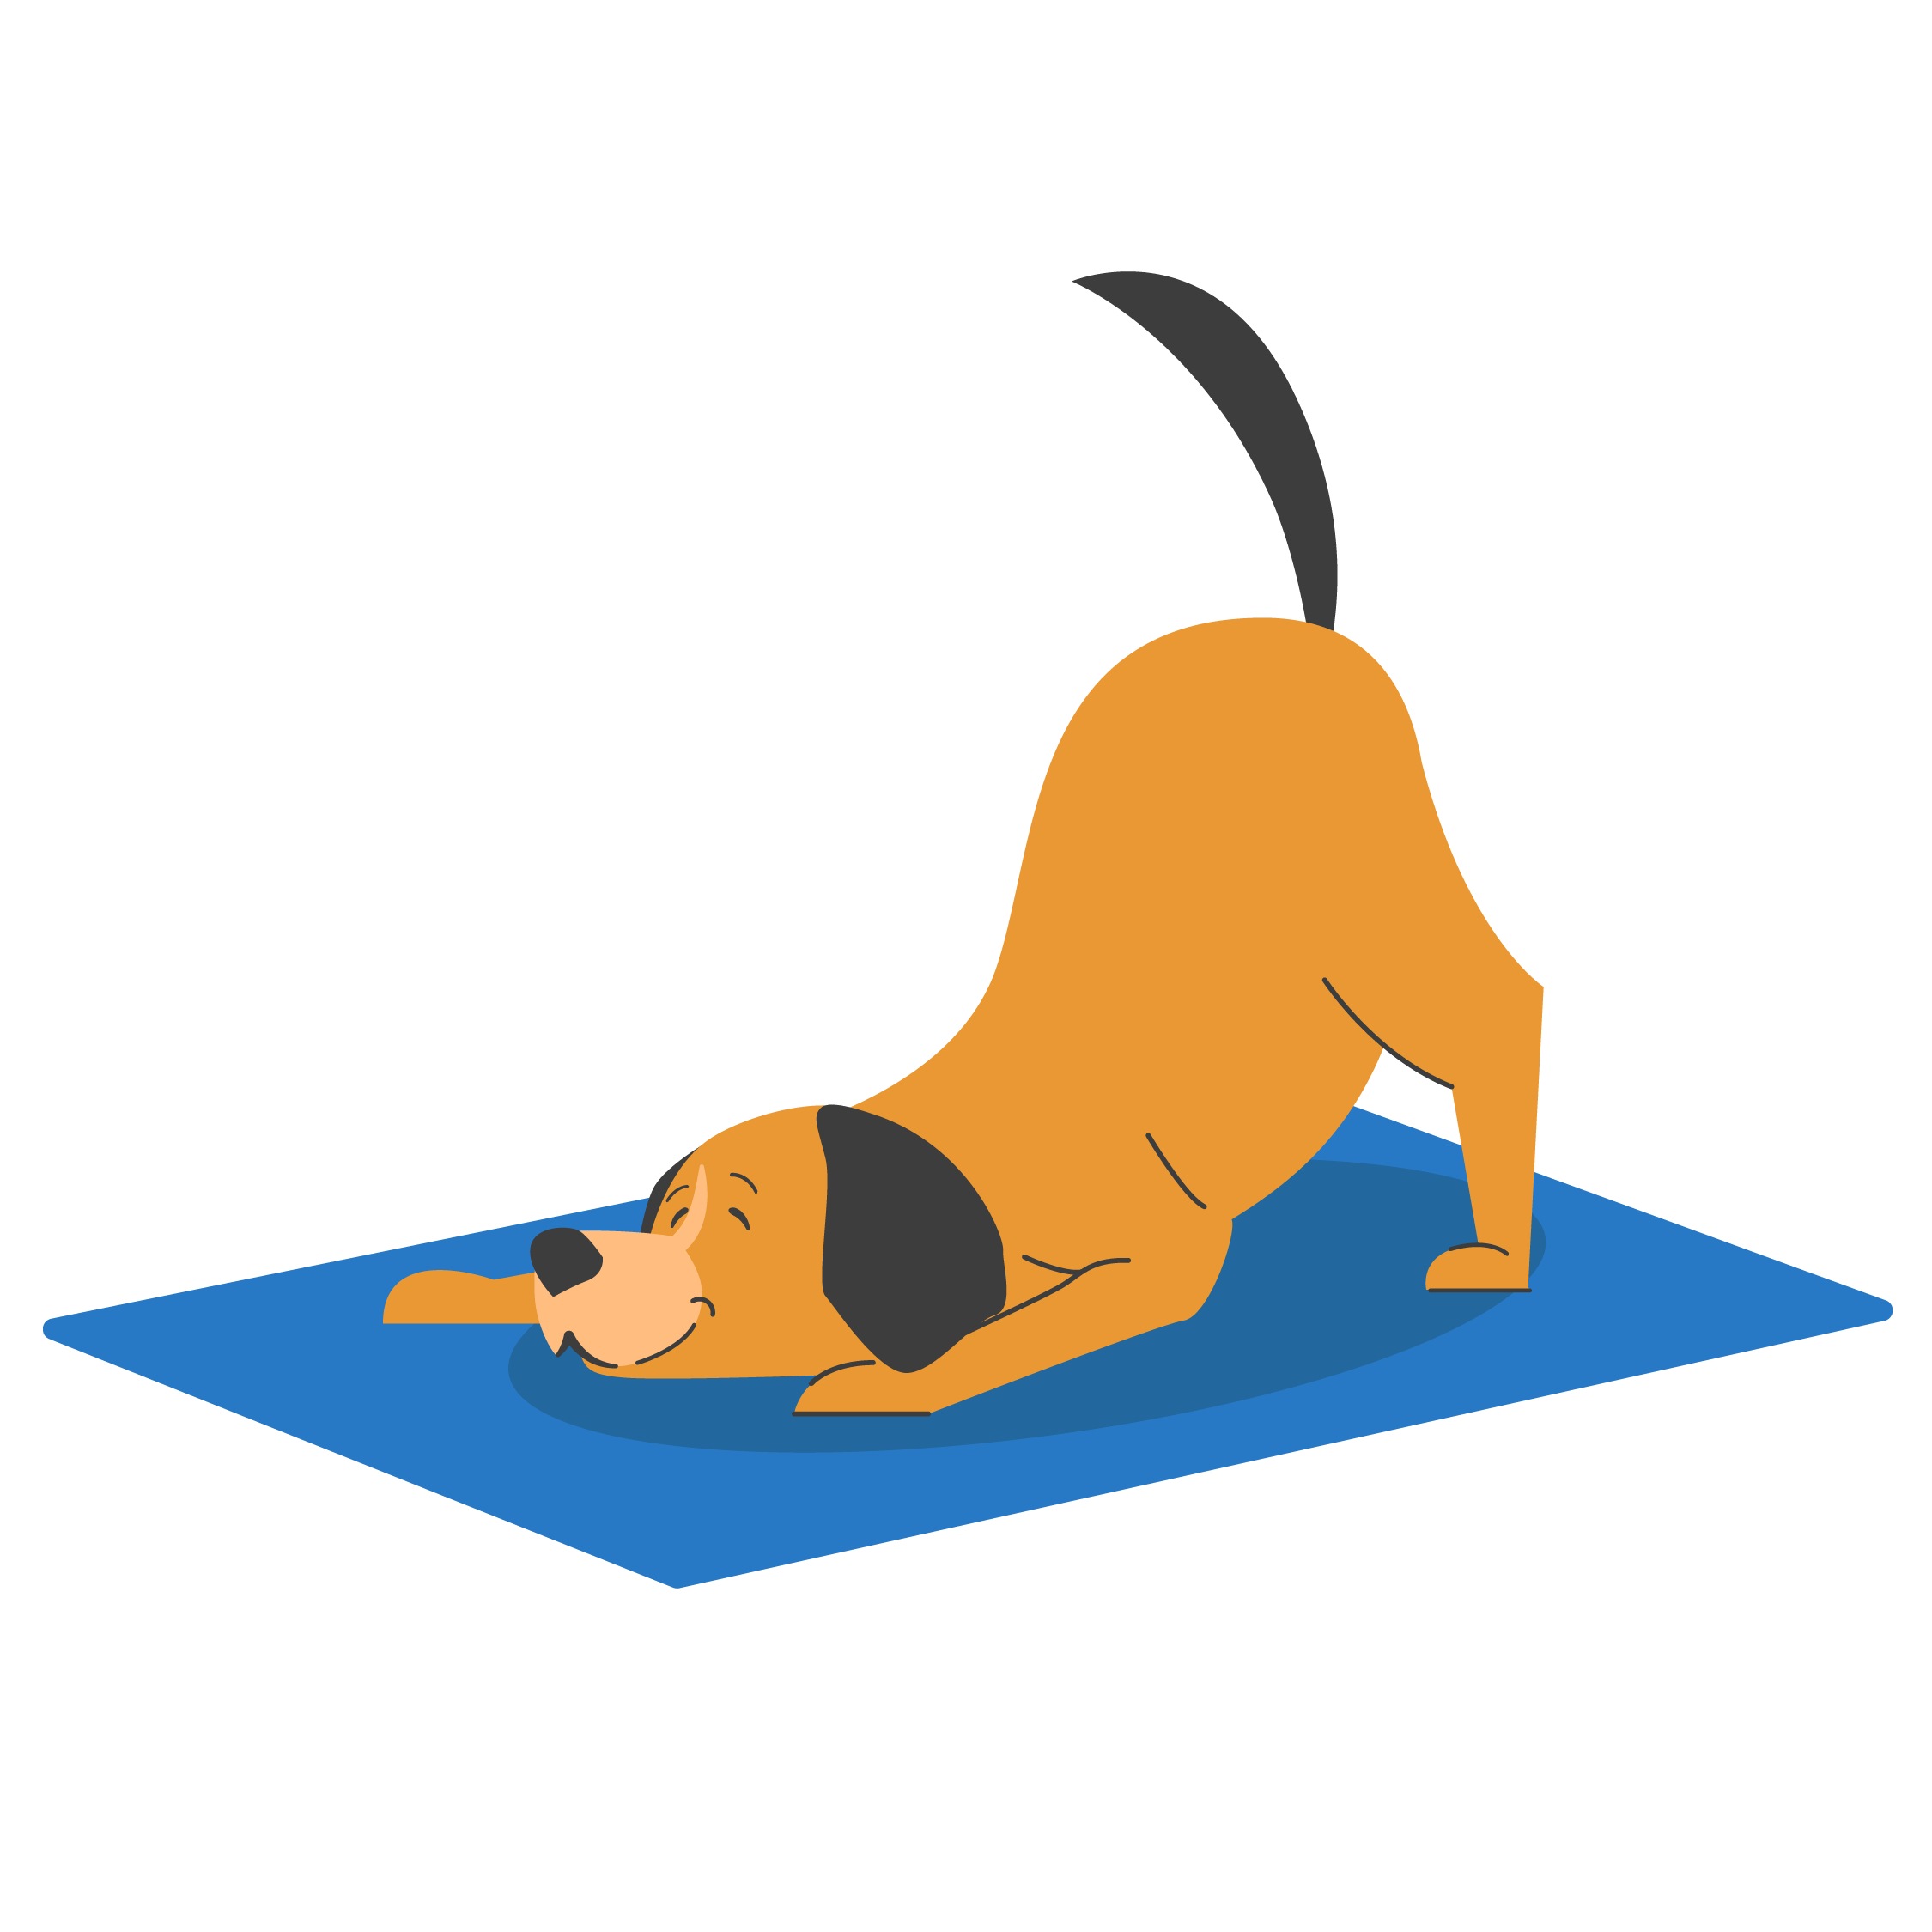 Animated brown dog in the downward dog yoga position on a blue yoga mat